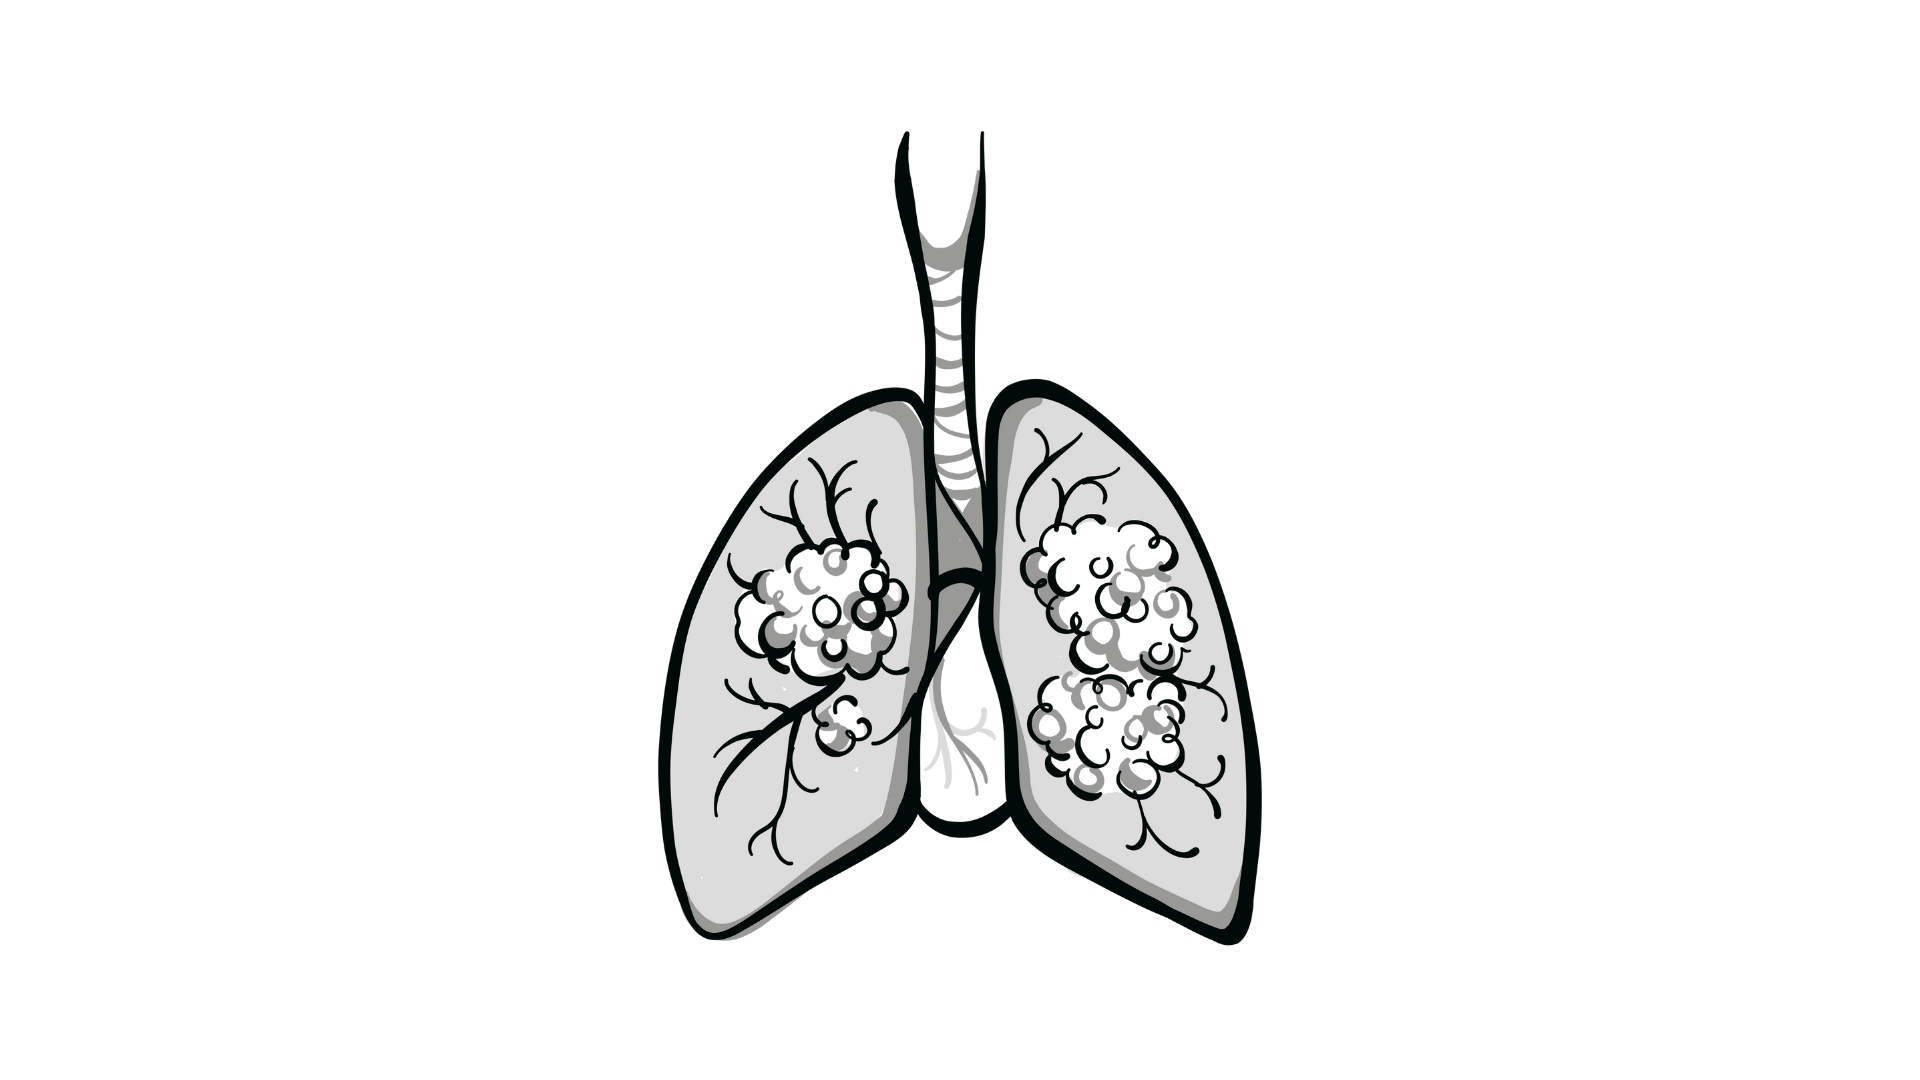 Larotrectinib Demonstrates Robust Responses in TRK Fusion-Positive Lung Cancer